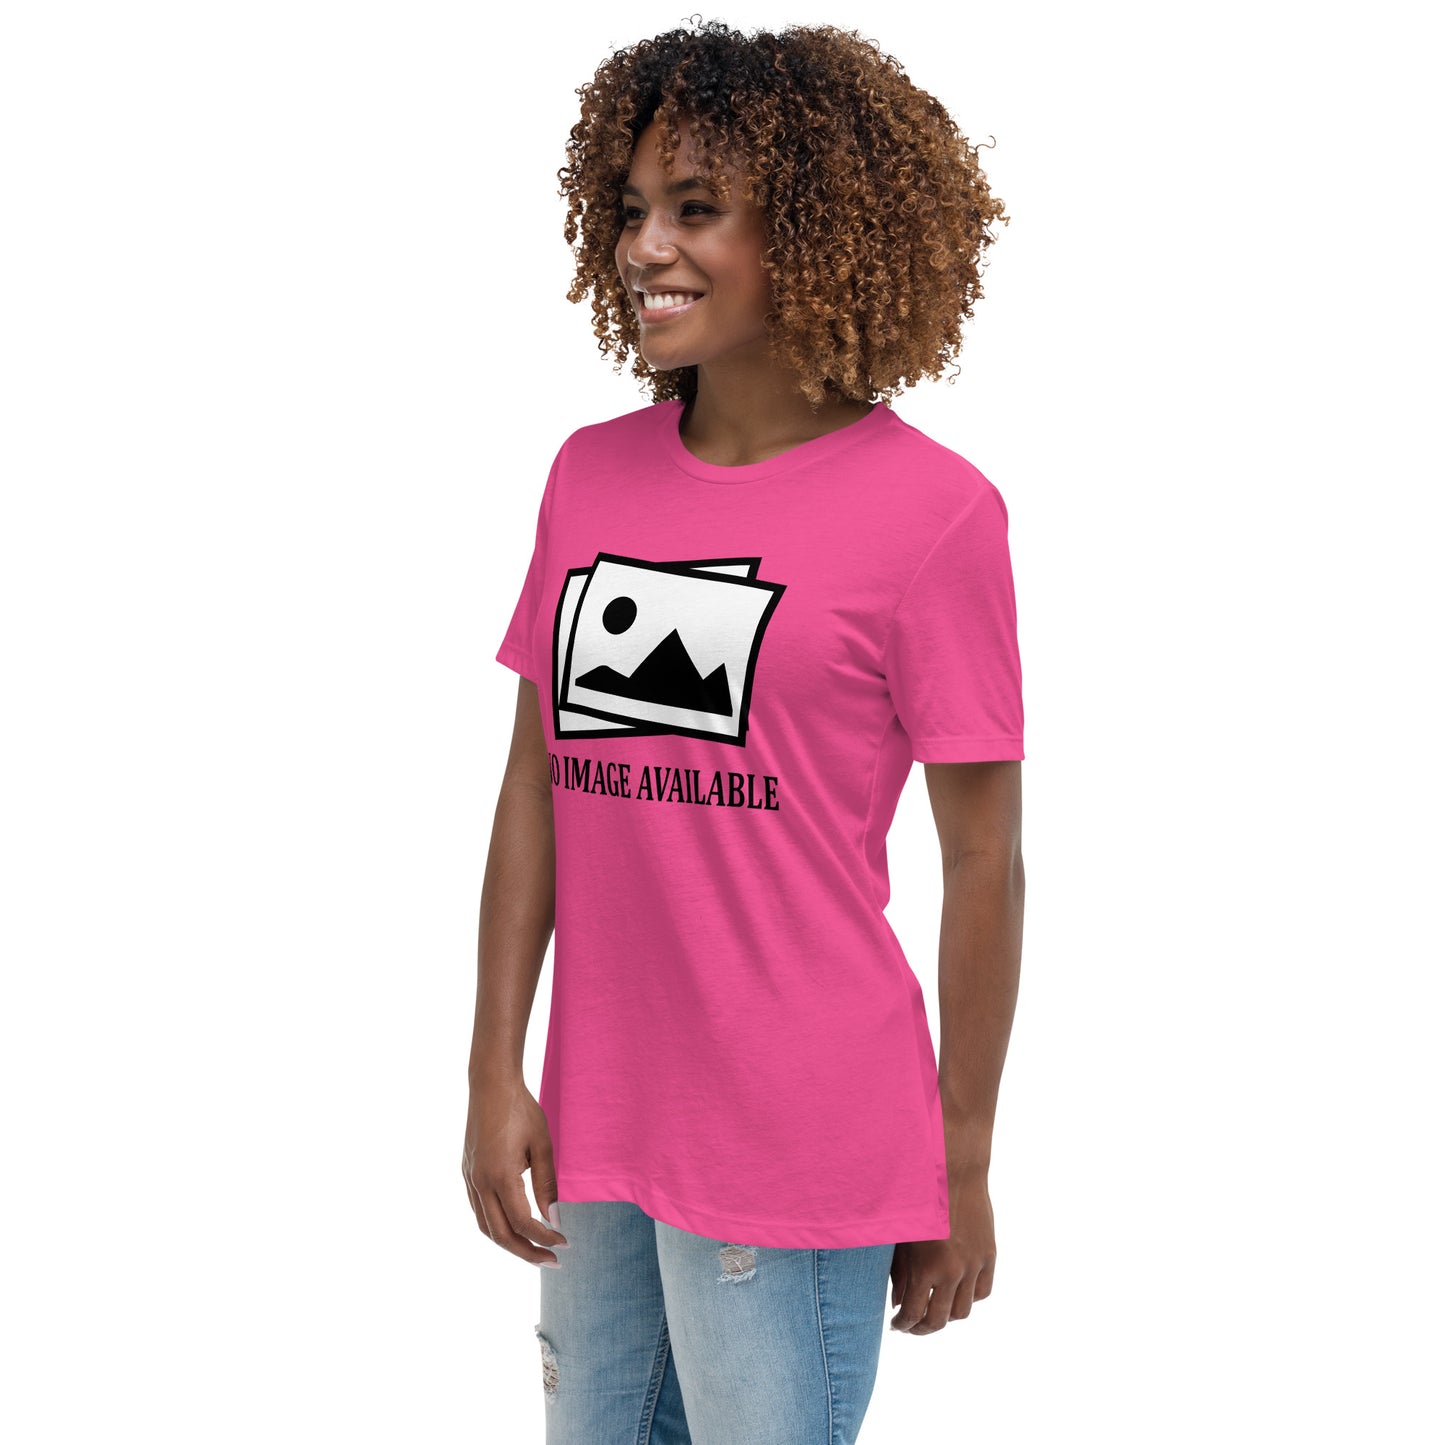 Women with berry t-shirt with image and text "no image available"